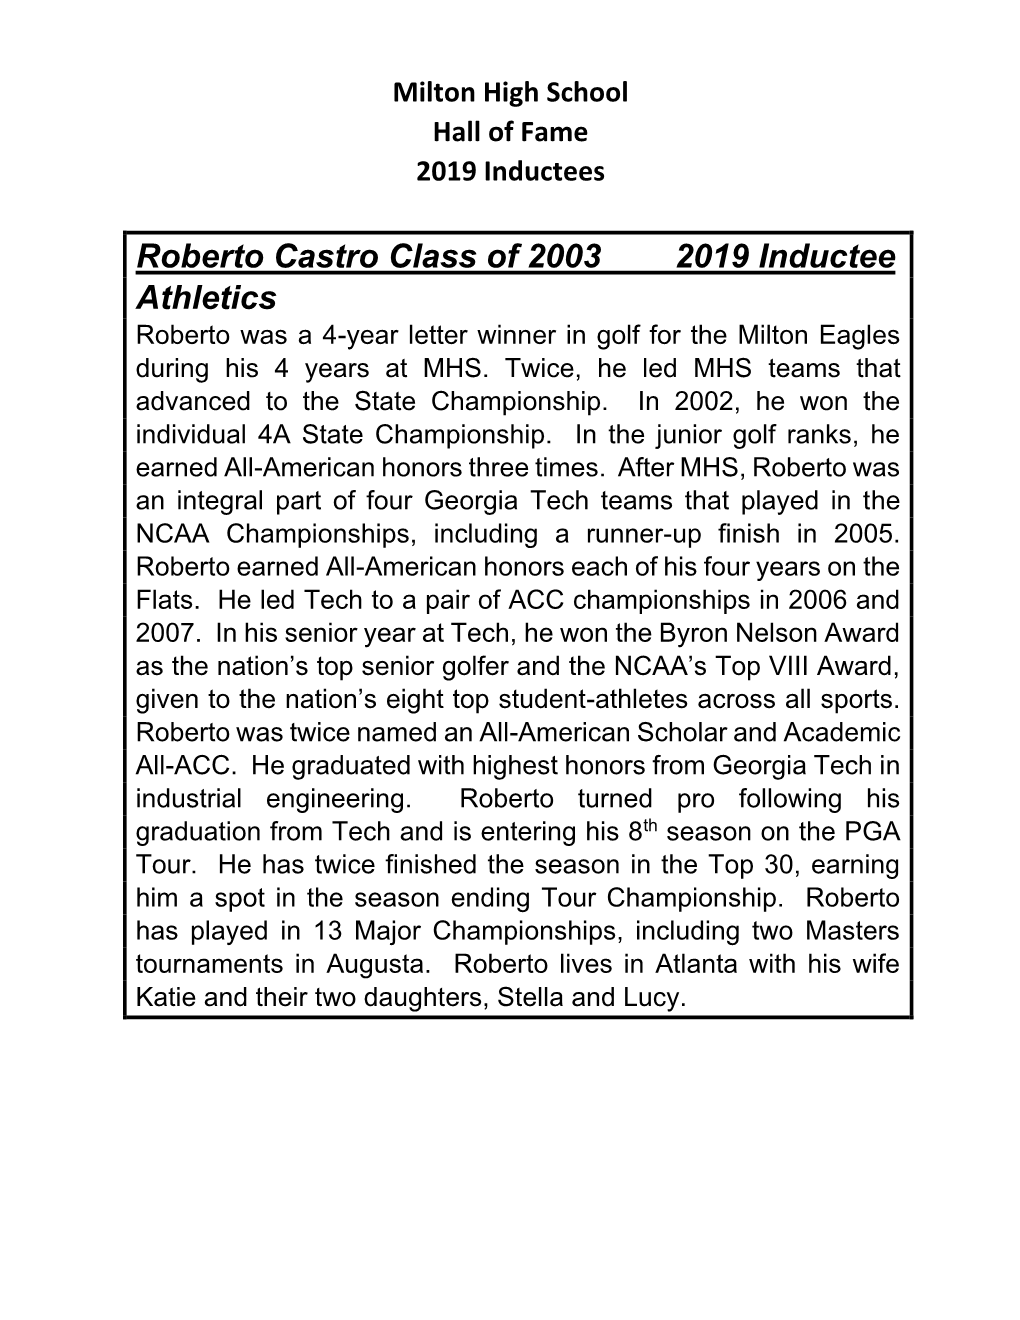 Roberto Castro Class of 2003 2019 Inductee Athletics Roberto Was a 4-Year Letter Winner in Golf for the Milton Eagles During His 4 Years at MHS